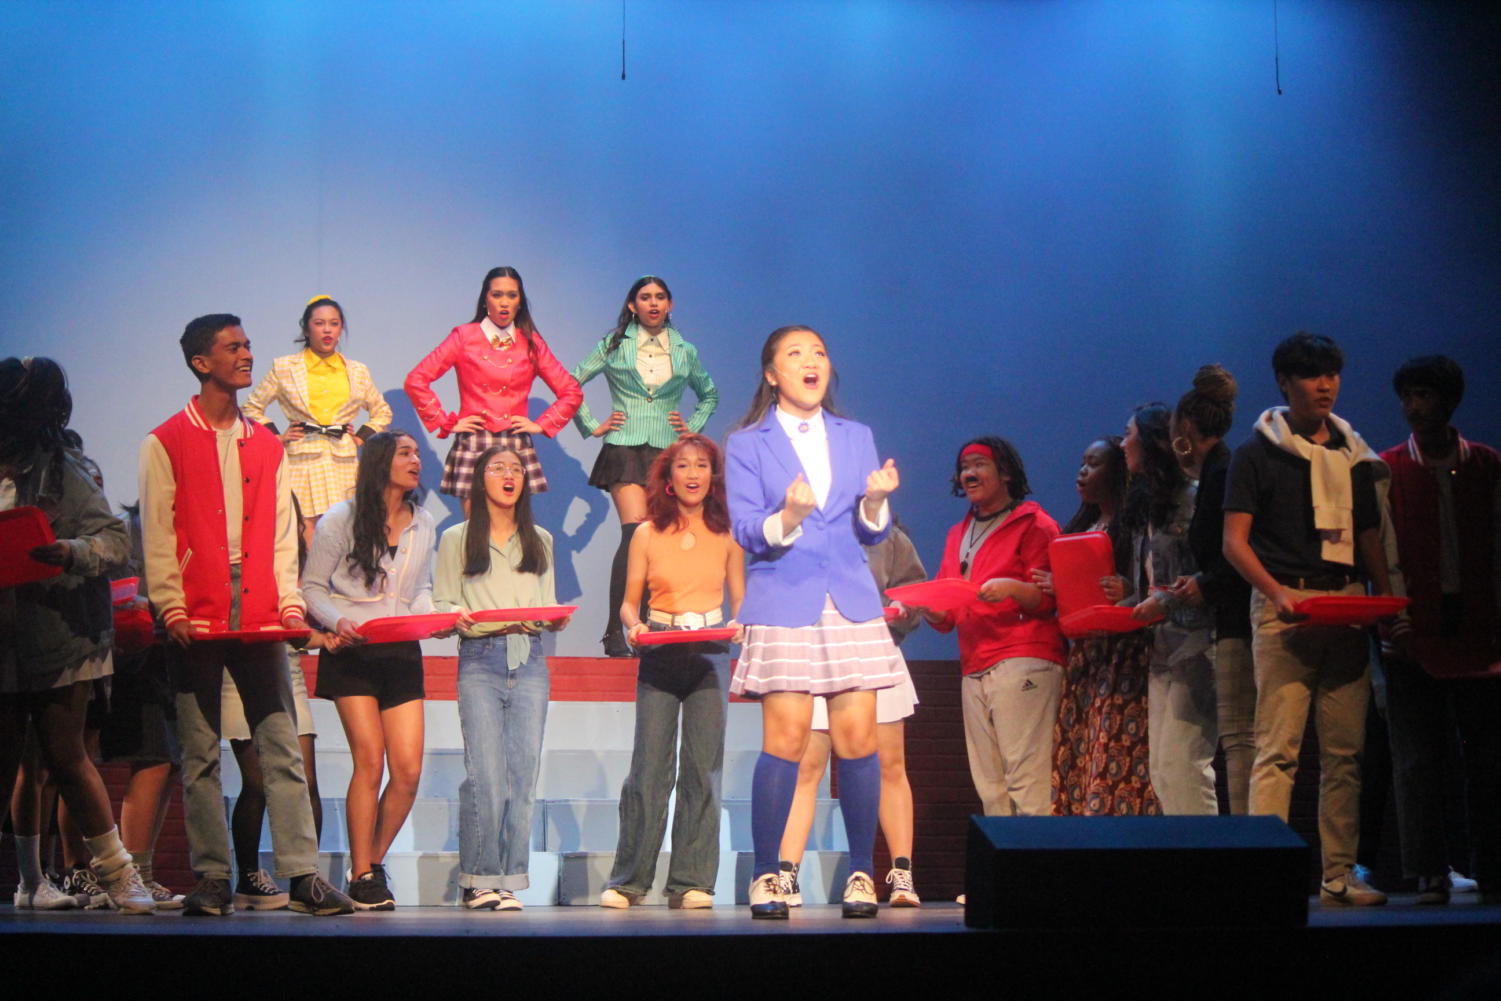 Dougherty+Valley+Drama+brings+big+fun+to+the+stage+with+%E2%80%9CHeathers%3A+The+Musical%E2%80%9D